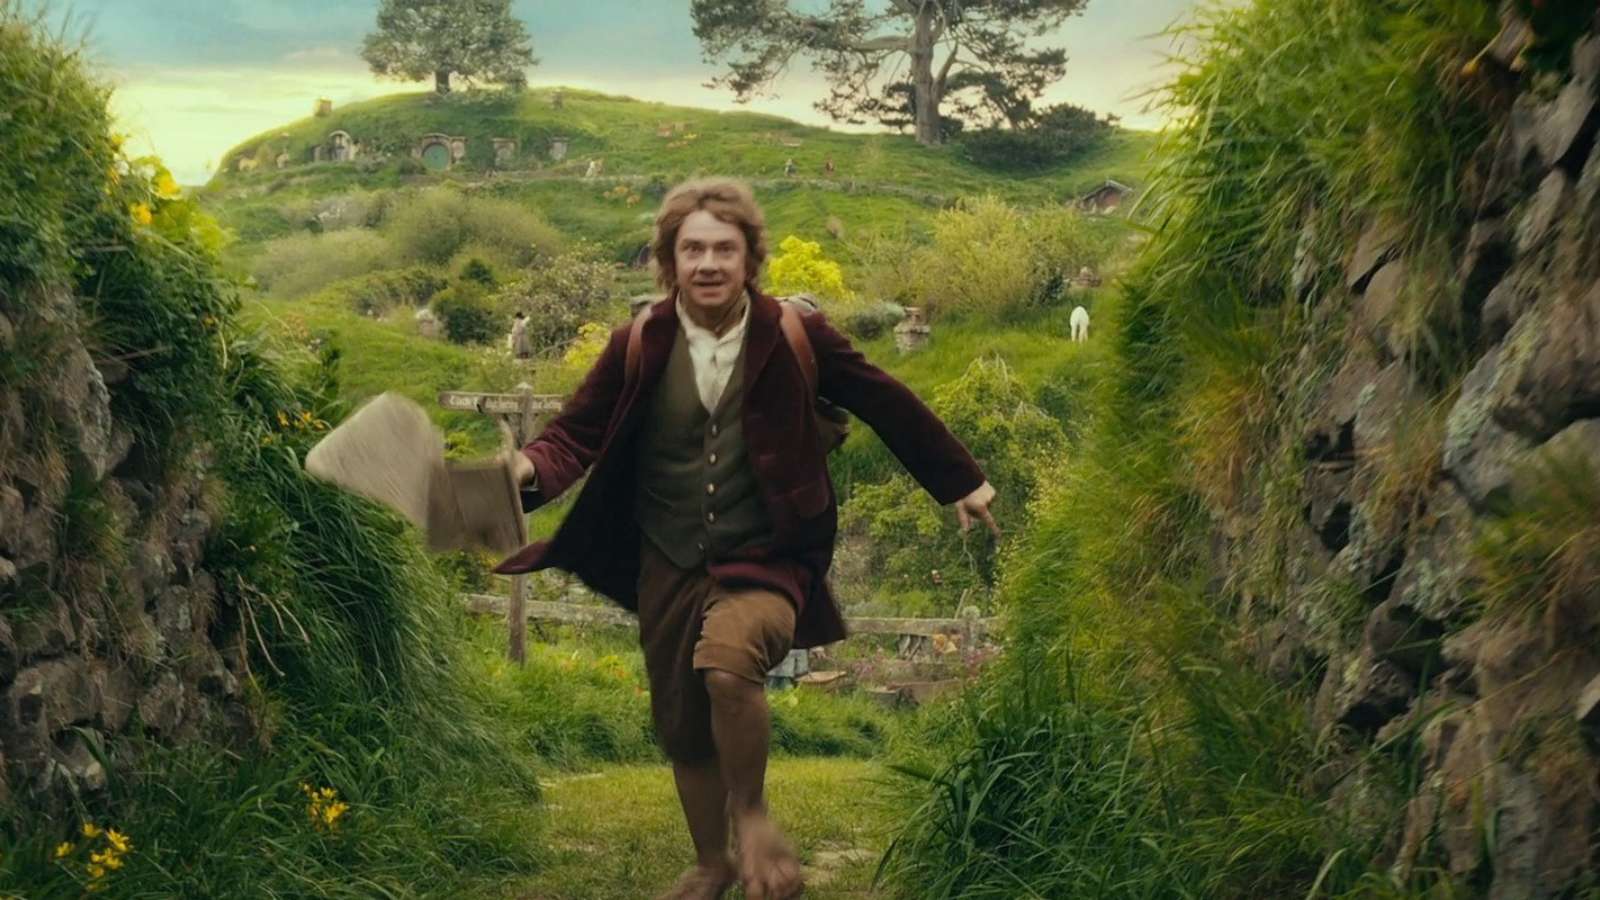 The Hobbit: An Unexpected Journey Video Release Date Set